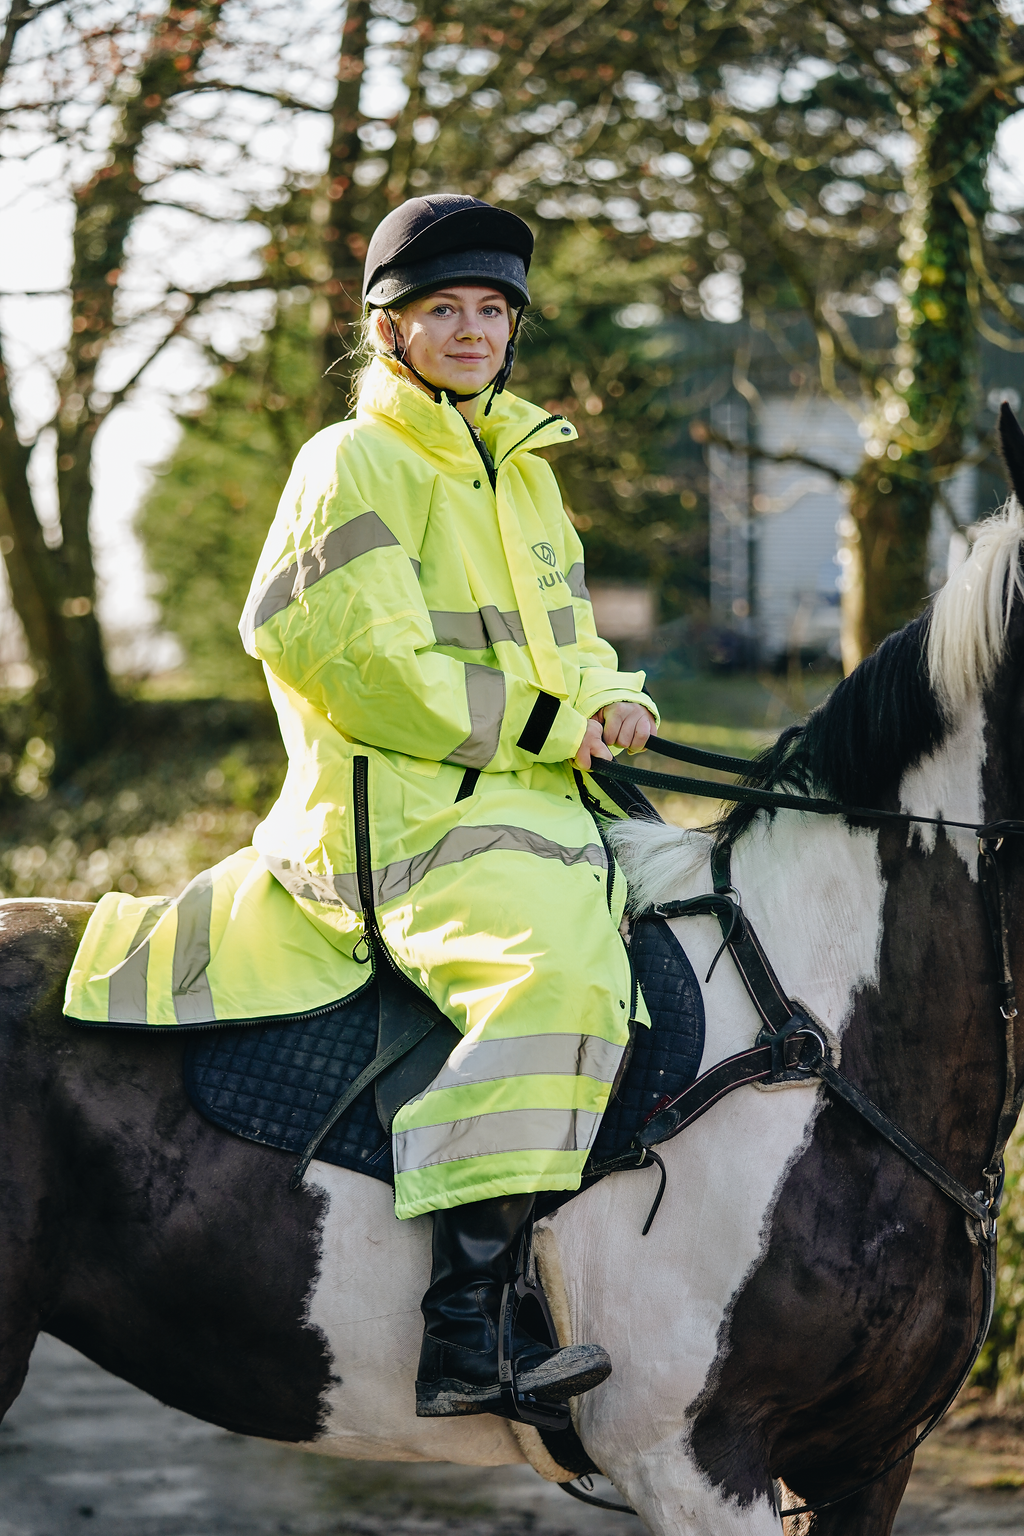 Equestrian Riding Coats - Check out the range from Equine Stay Dry